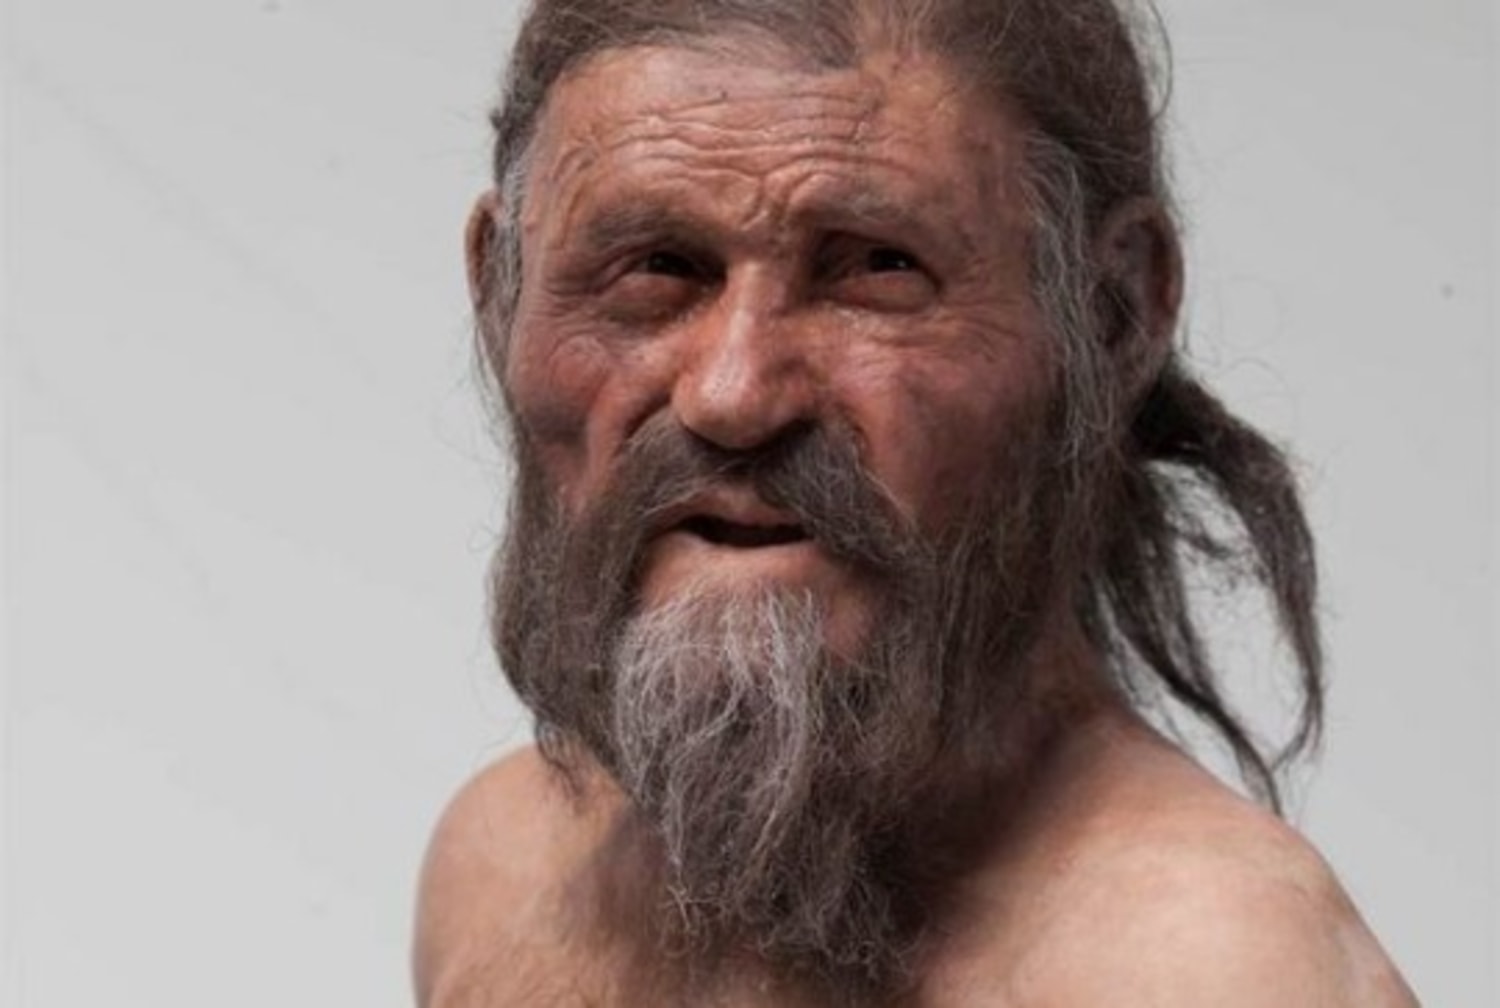 Iceman was Central Europe native, new research finds